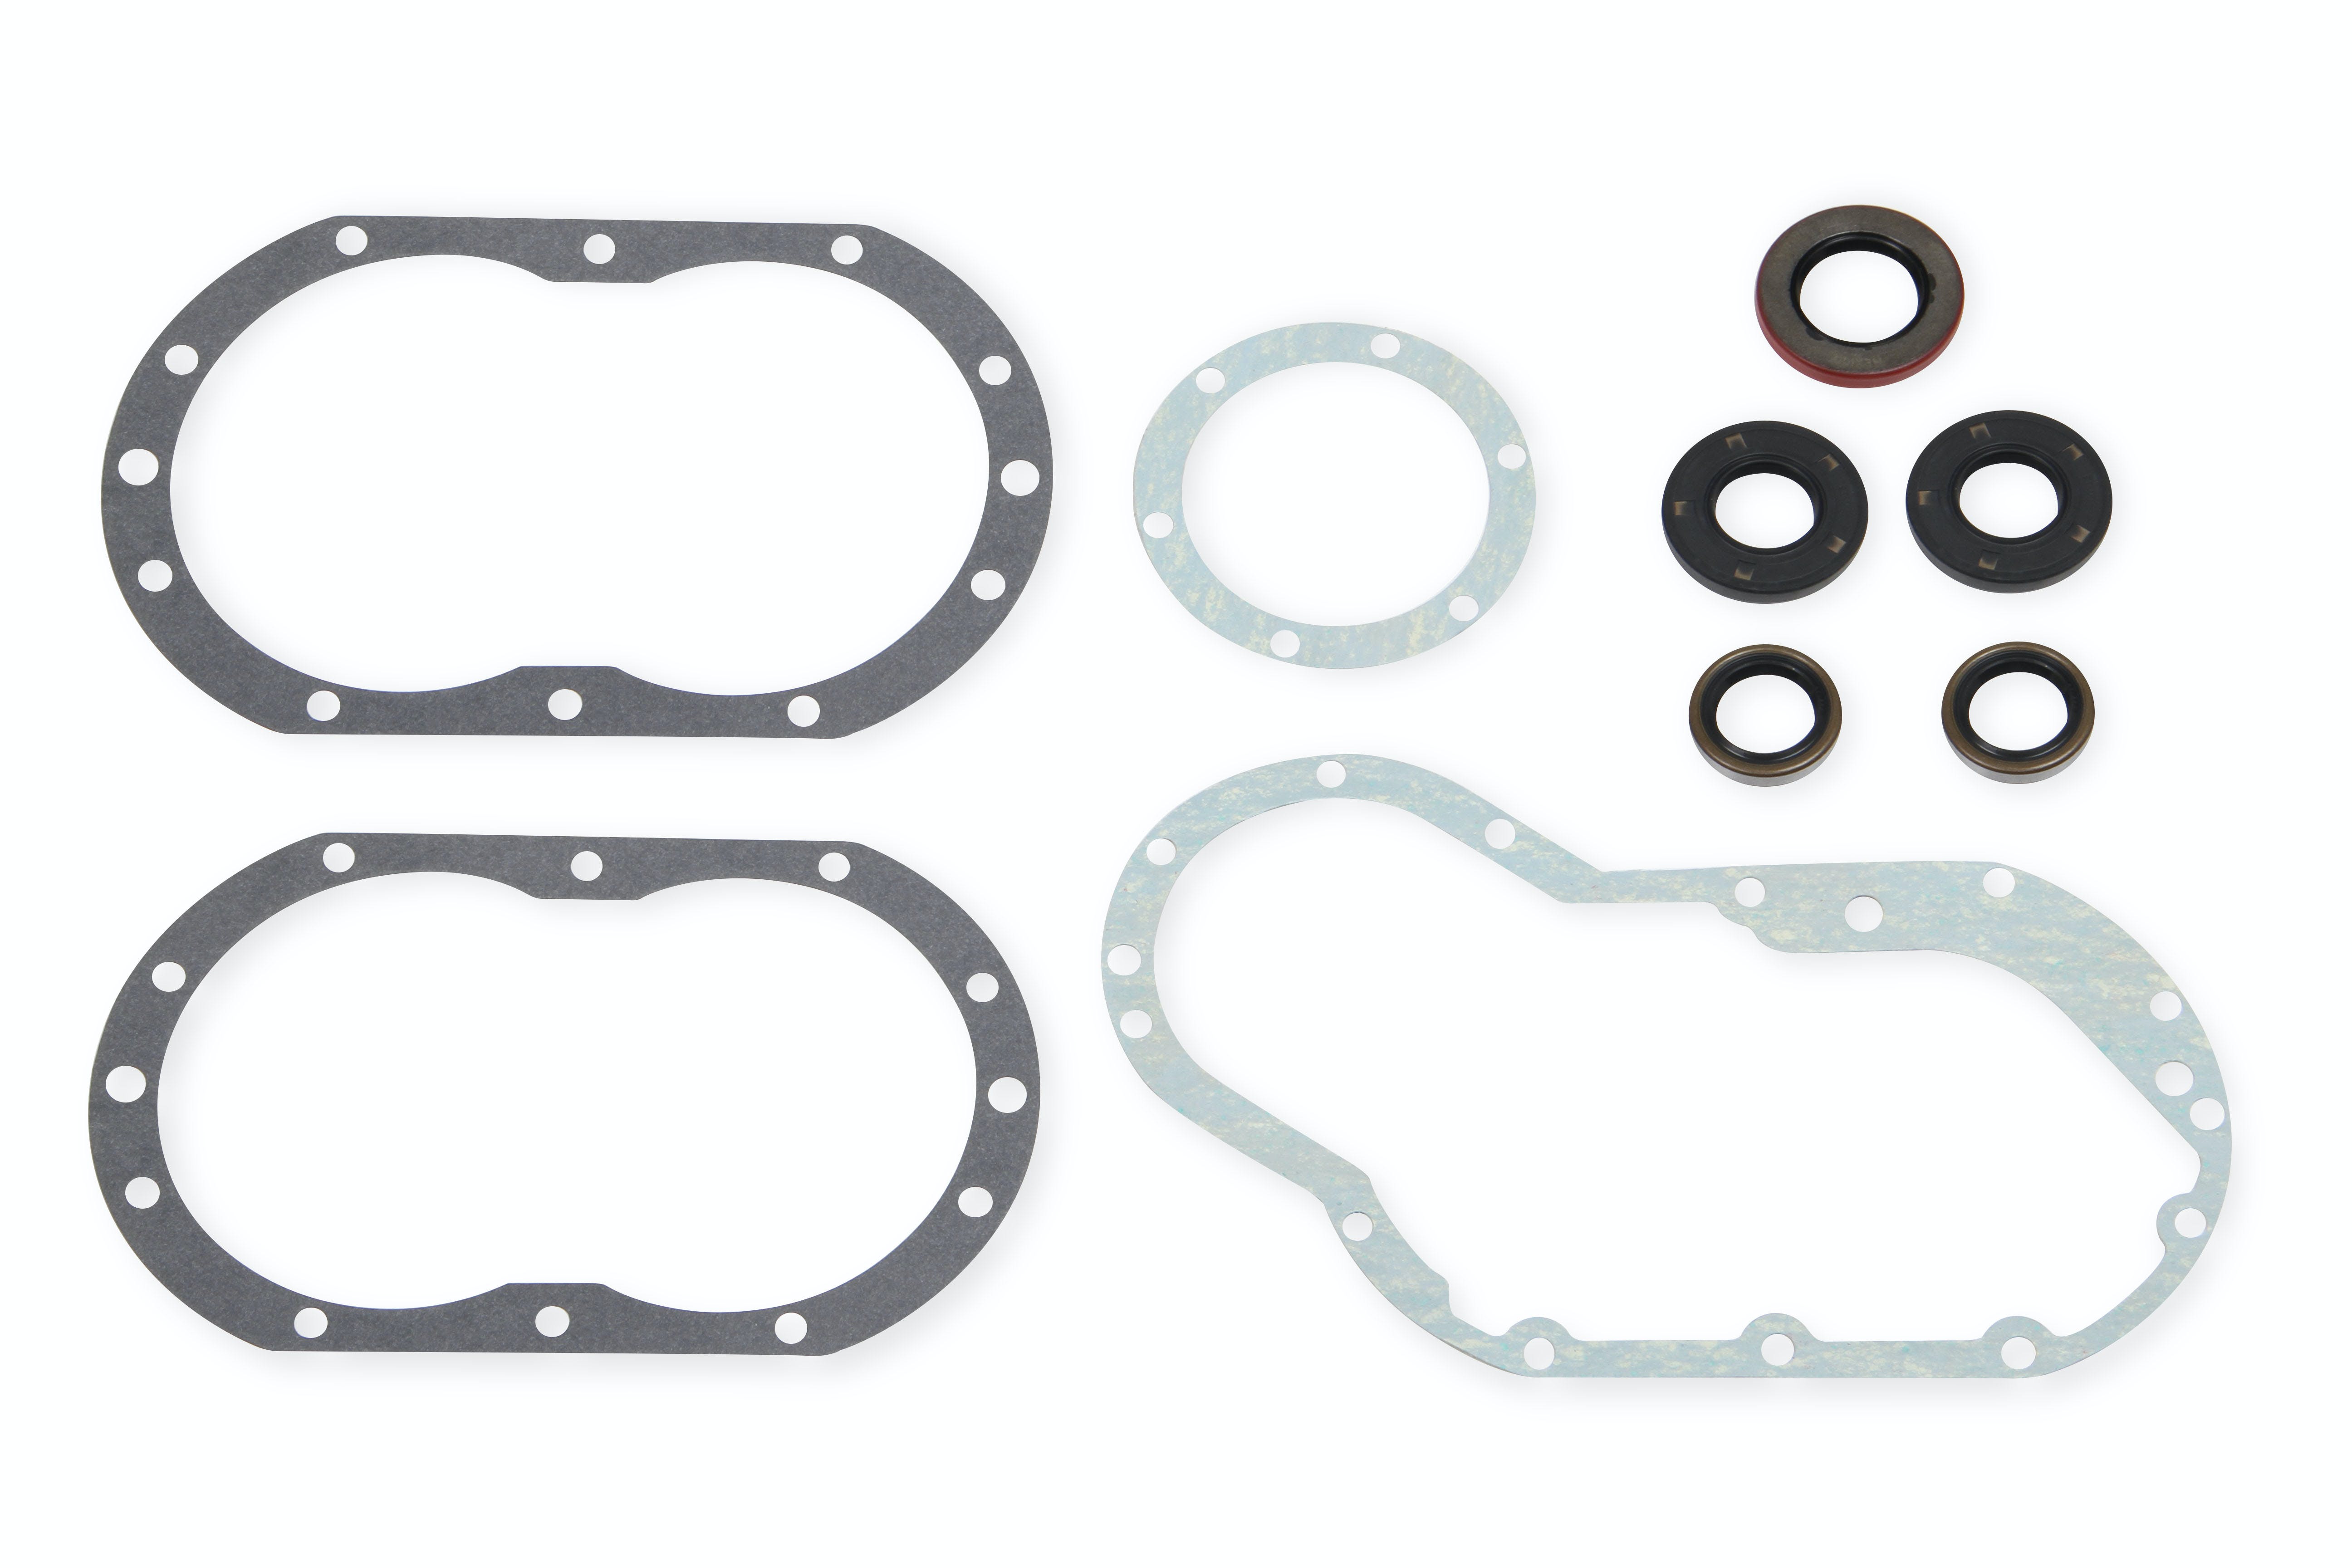 Weiand 9595 KIT - SEAL and GASKET P-S 174 FSB